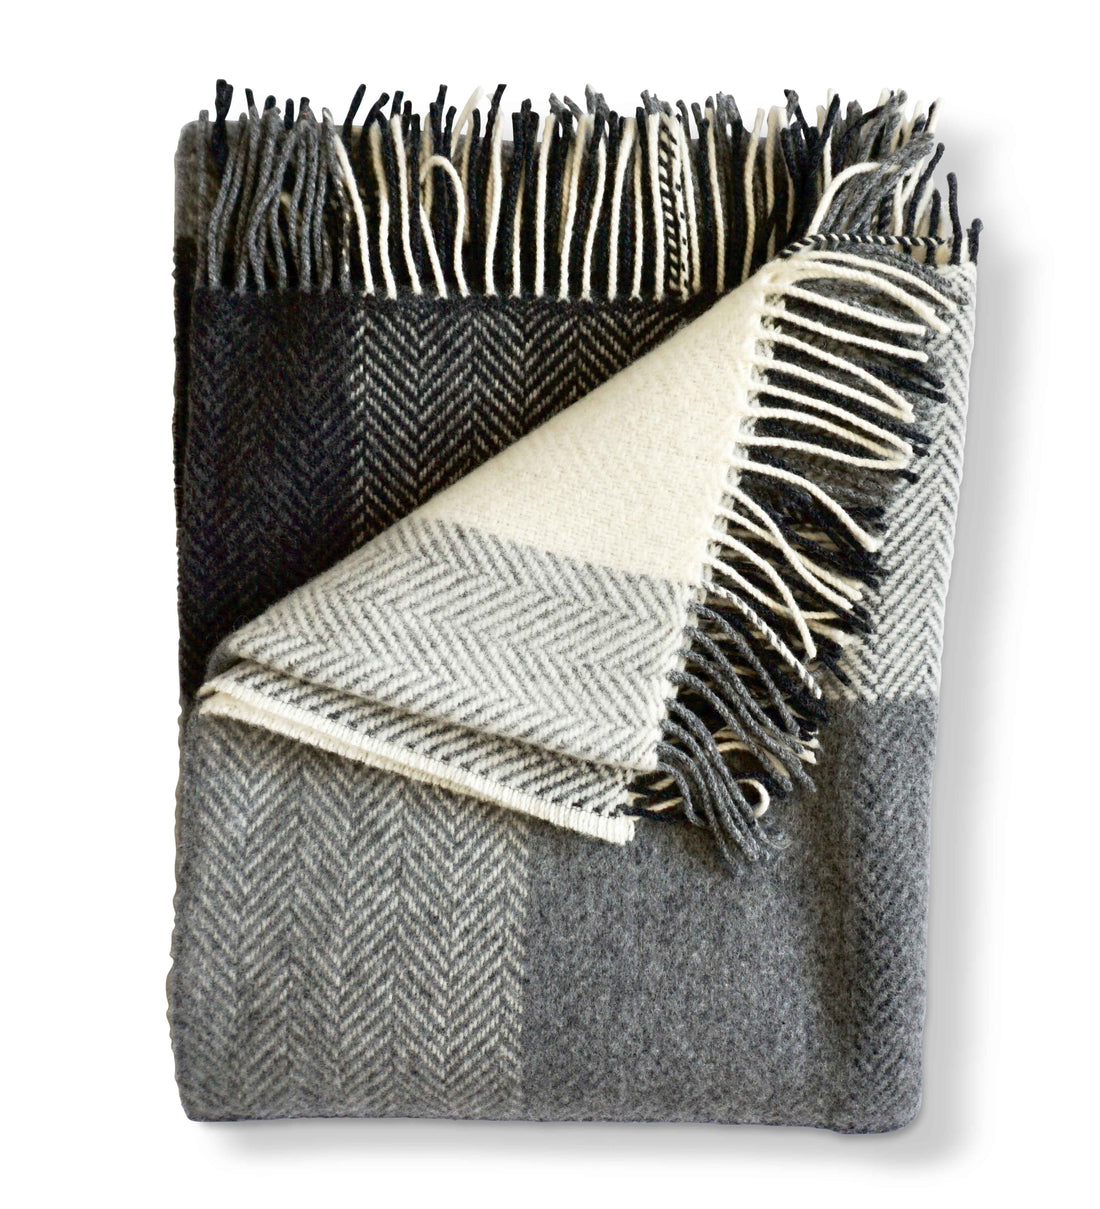 Folded Herringbone throw in Buffalo Check, a classic black and white colored throw with cream tassel detail. Timeless herringbone design. Super soft luster of cashmere. cozy comfort of merino wool. A chunky and cuddly classic. 95% Merino Lambswool and 5% Cashmere. Woven in Ireland.